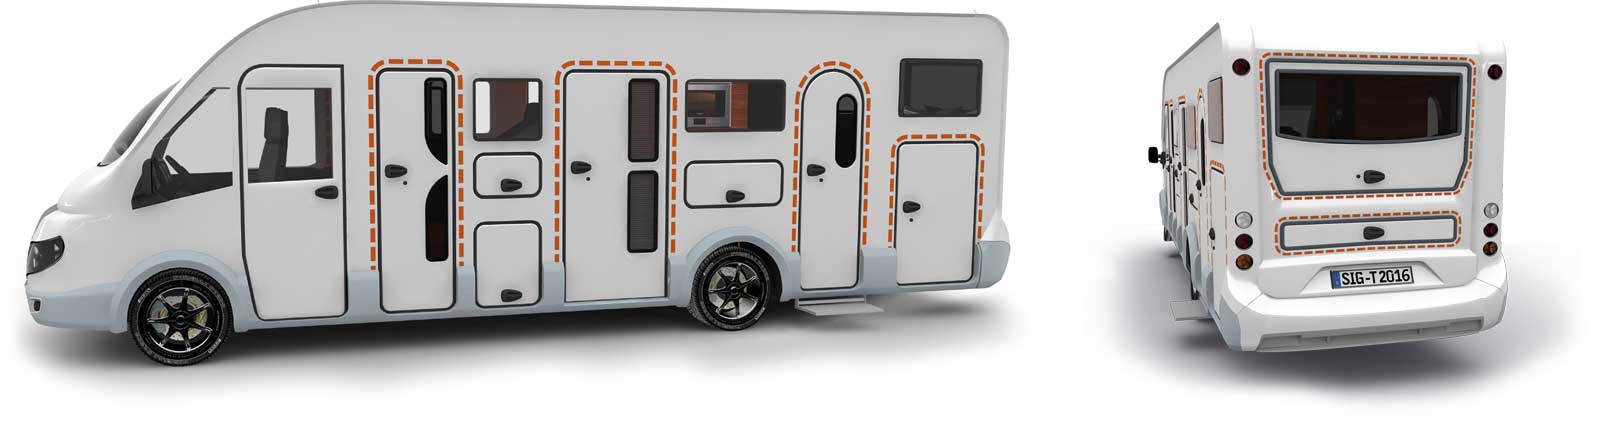 Satisfied tegos customers with Giottiline caravans and RVs